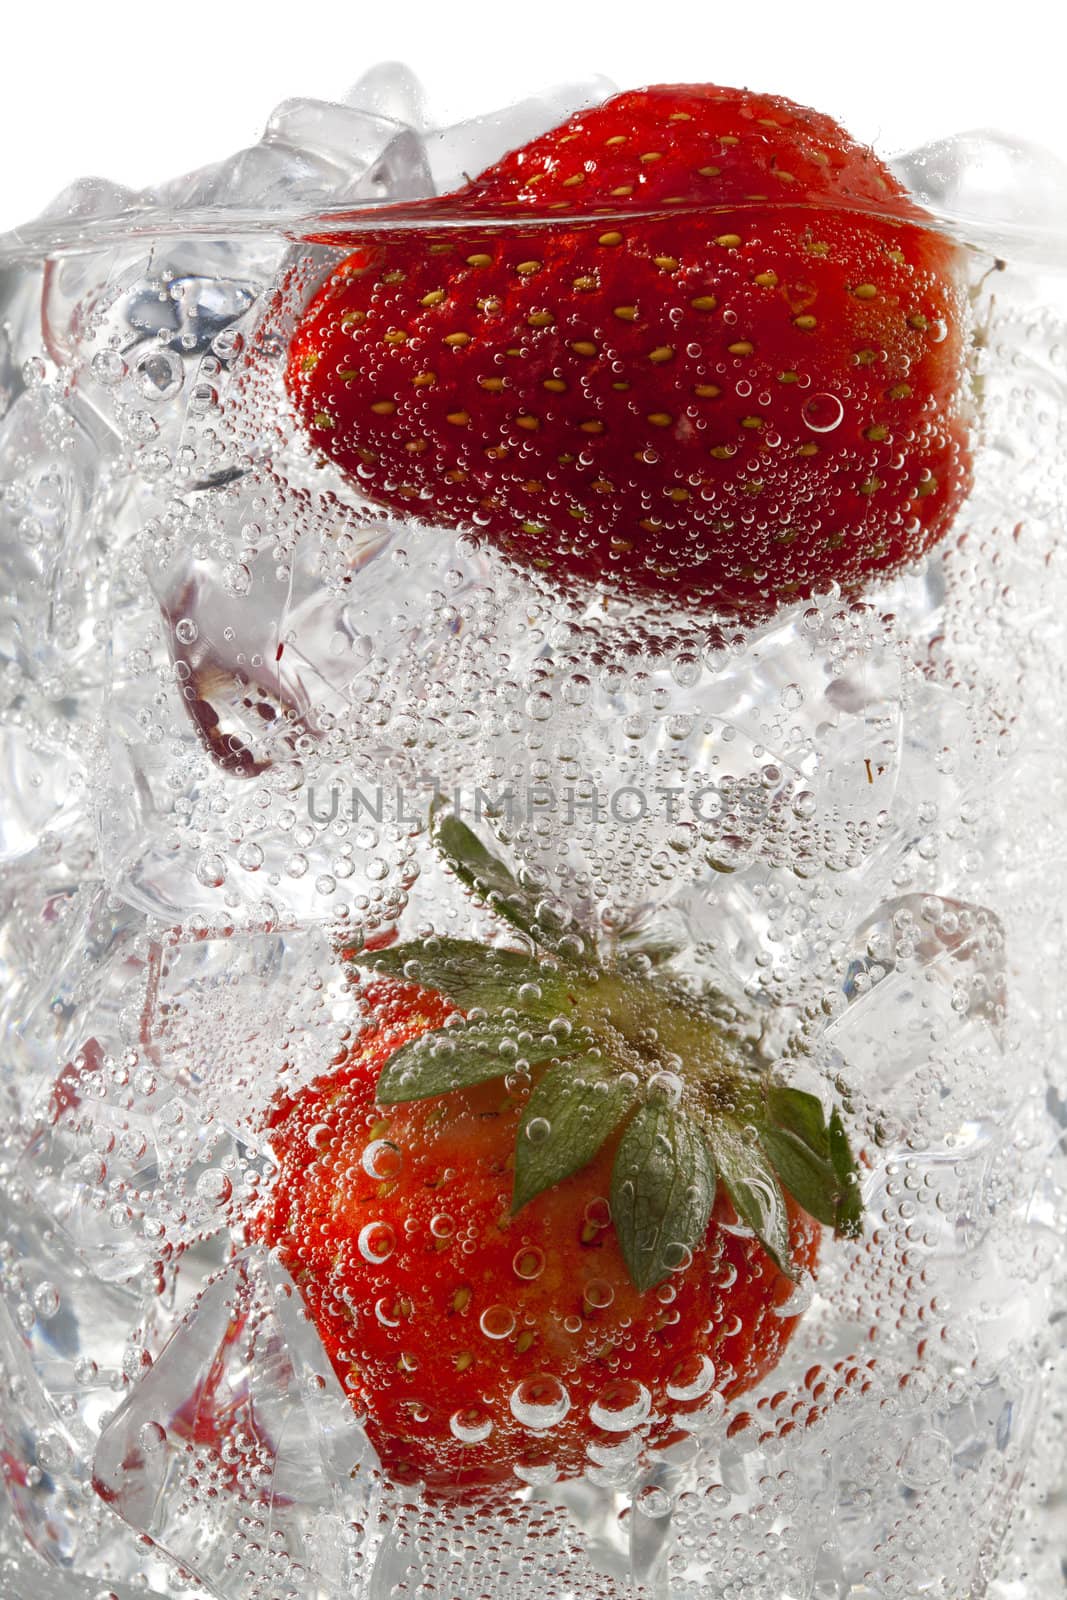 strawberries in ice cubes by kozzi